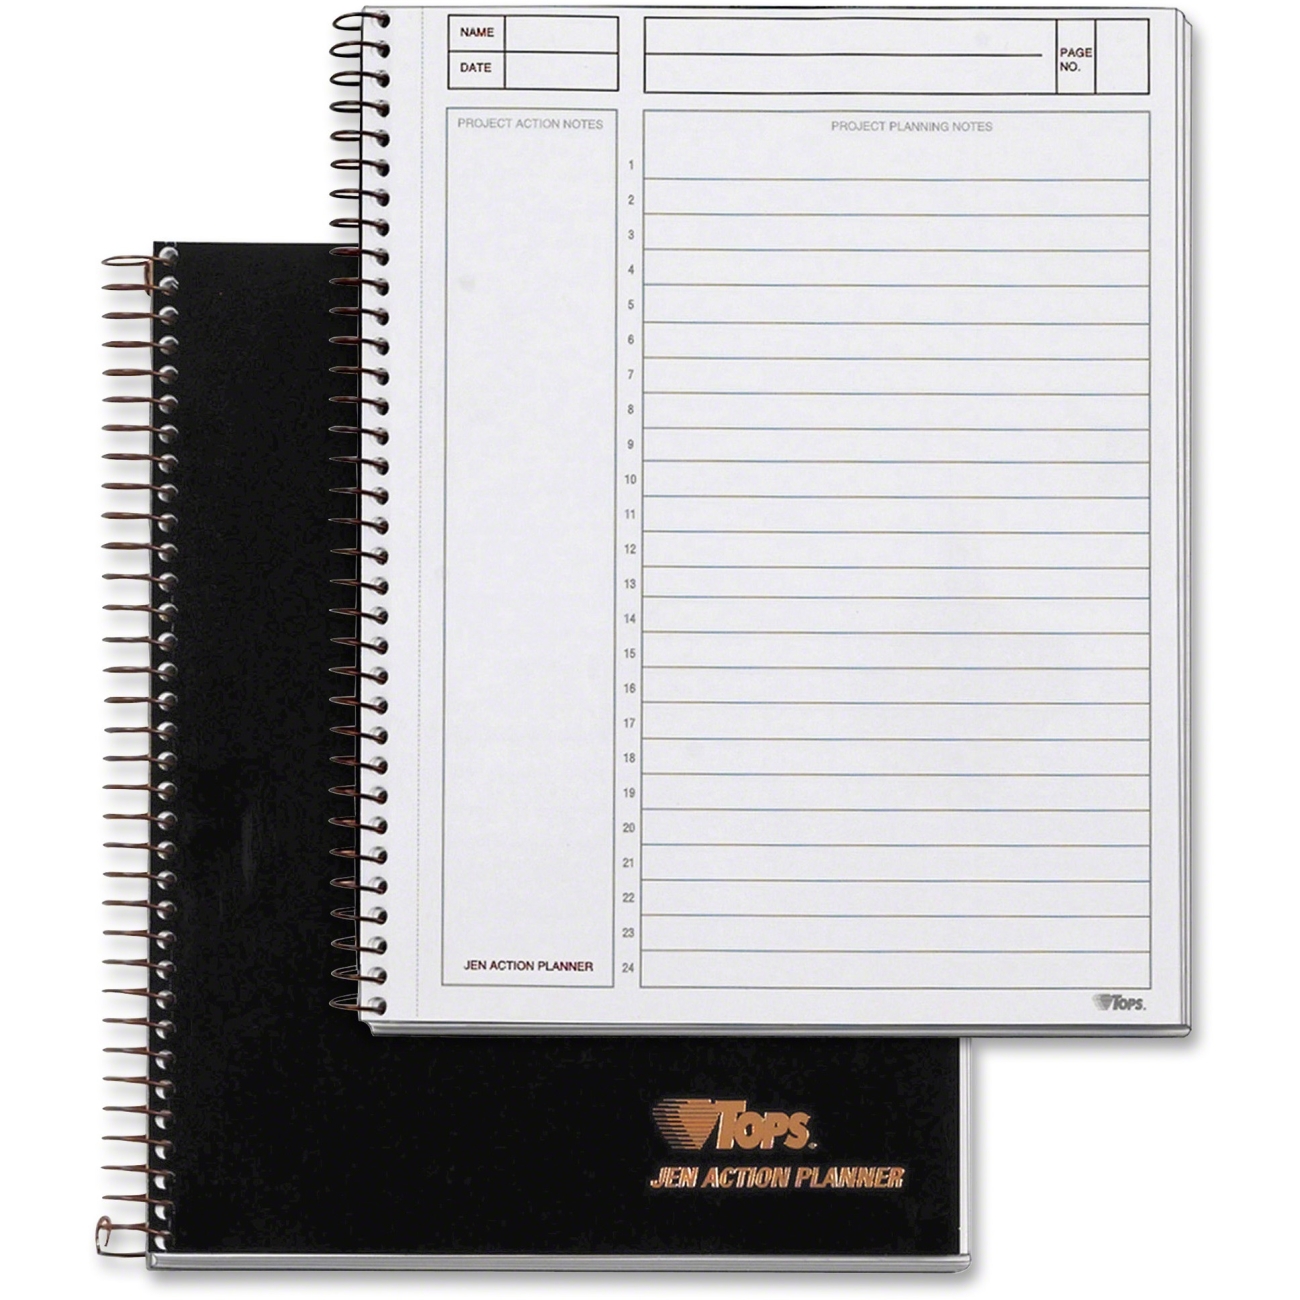 TOPS Products Calendars & Planners